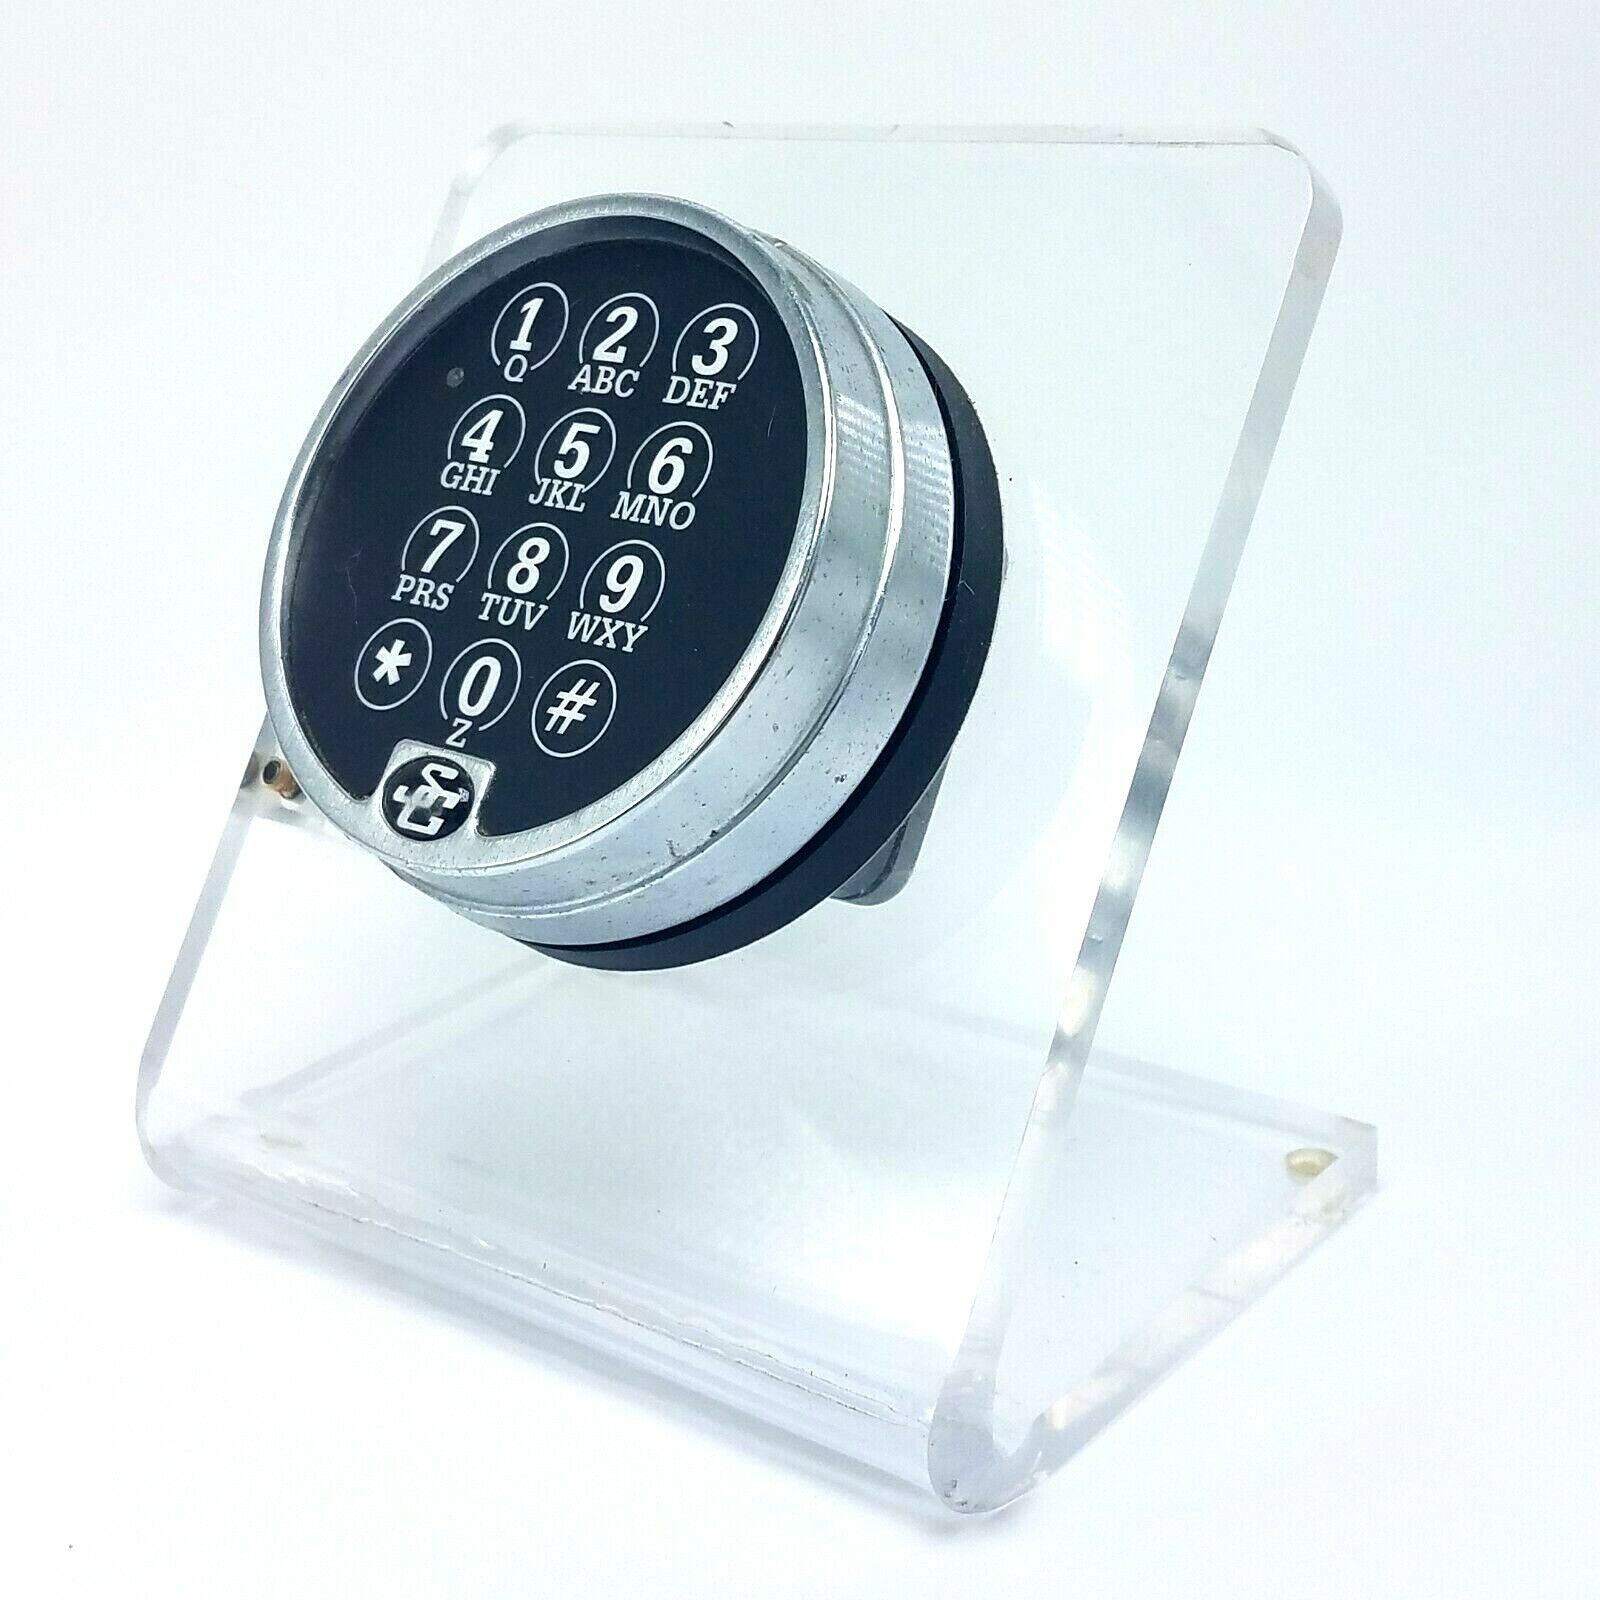 Sargent and Greenleaf E6100 Push Button SC Combination Lock Display in Lucite